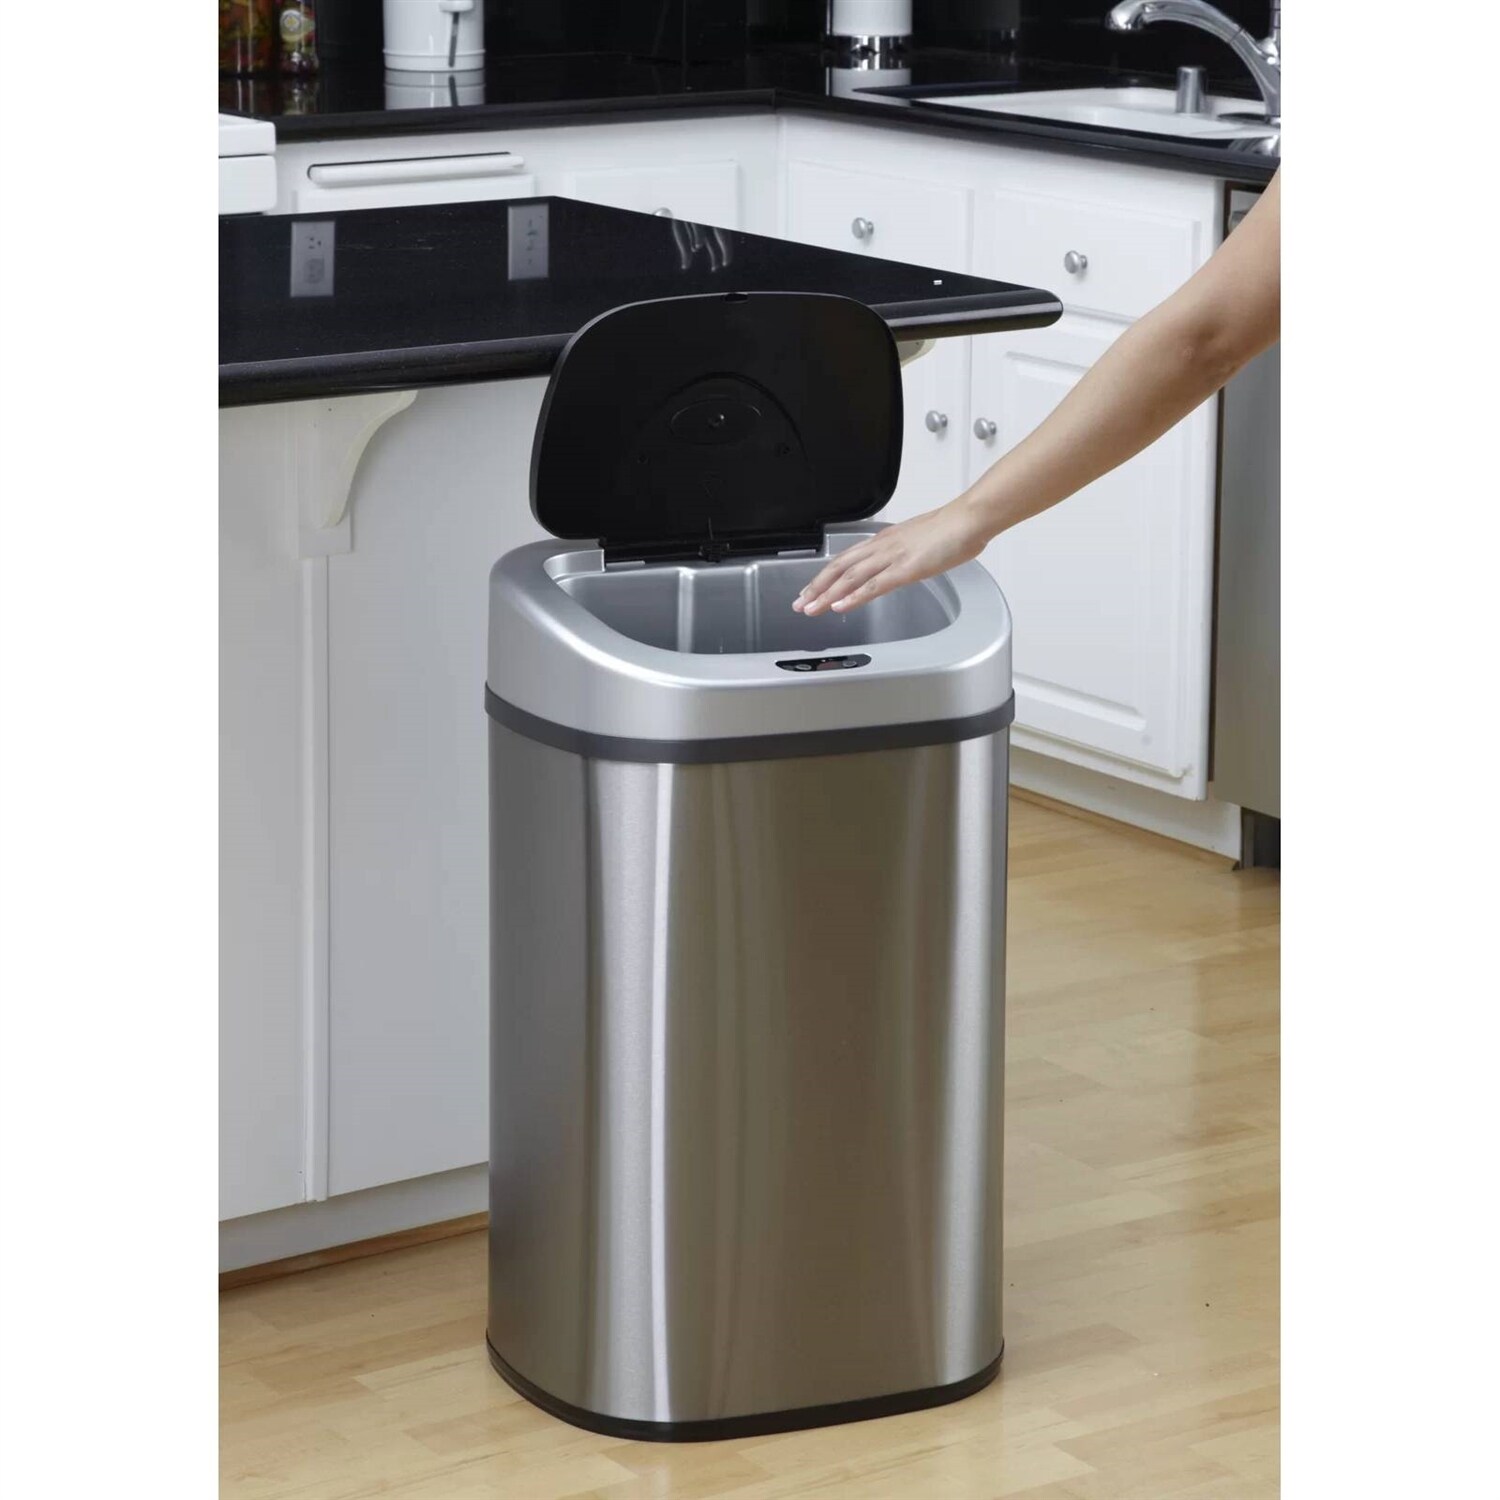 https://ak1.ostkcdn.com/images/products/is/images/direct/0f12769db31a61a932ca6501a6a74e419f928ec1/Stainless-Steel-21-Gallon-Kitchen-Trash-Can-with-Motion-Sensor-Lid.jpg